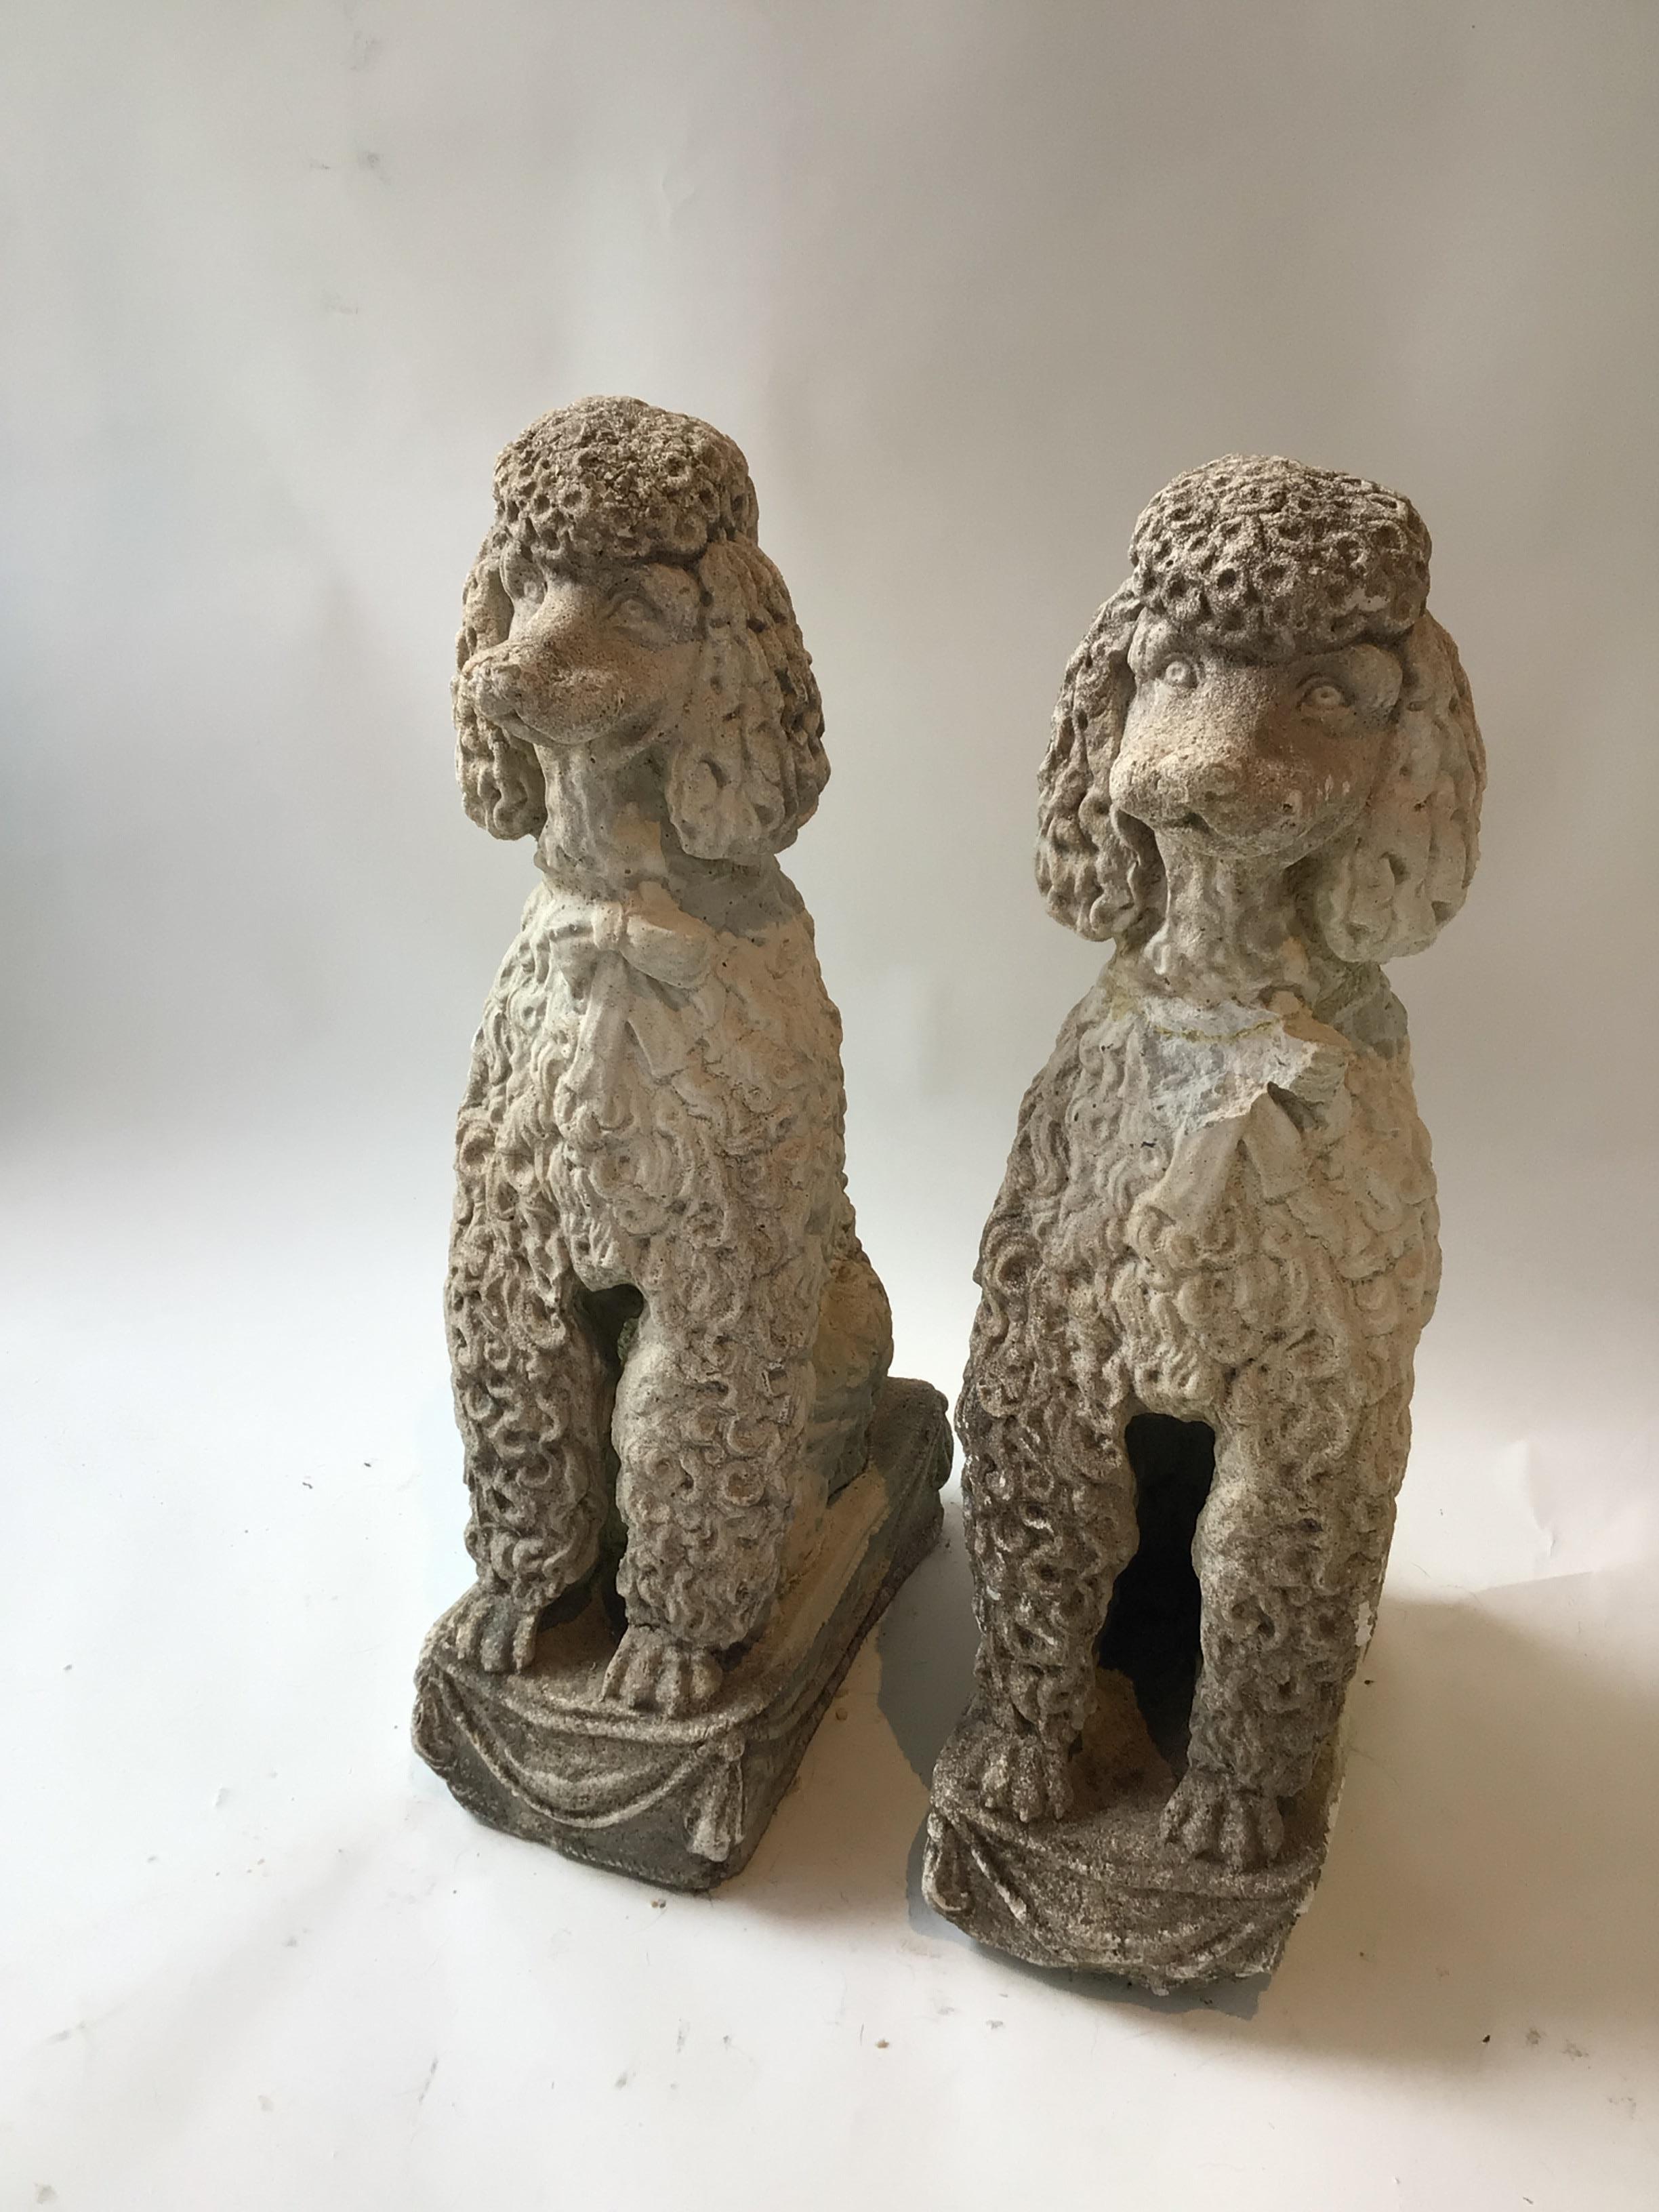 Pair of 1960s concrete poodles. One poodles head was detached. It has been glued back on. As shown in the last 2 pictures. One bow tie is missing some concrete.